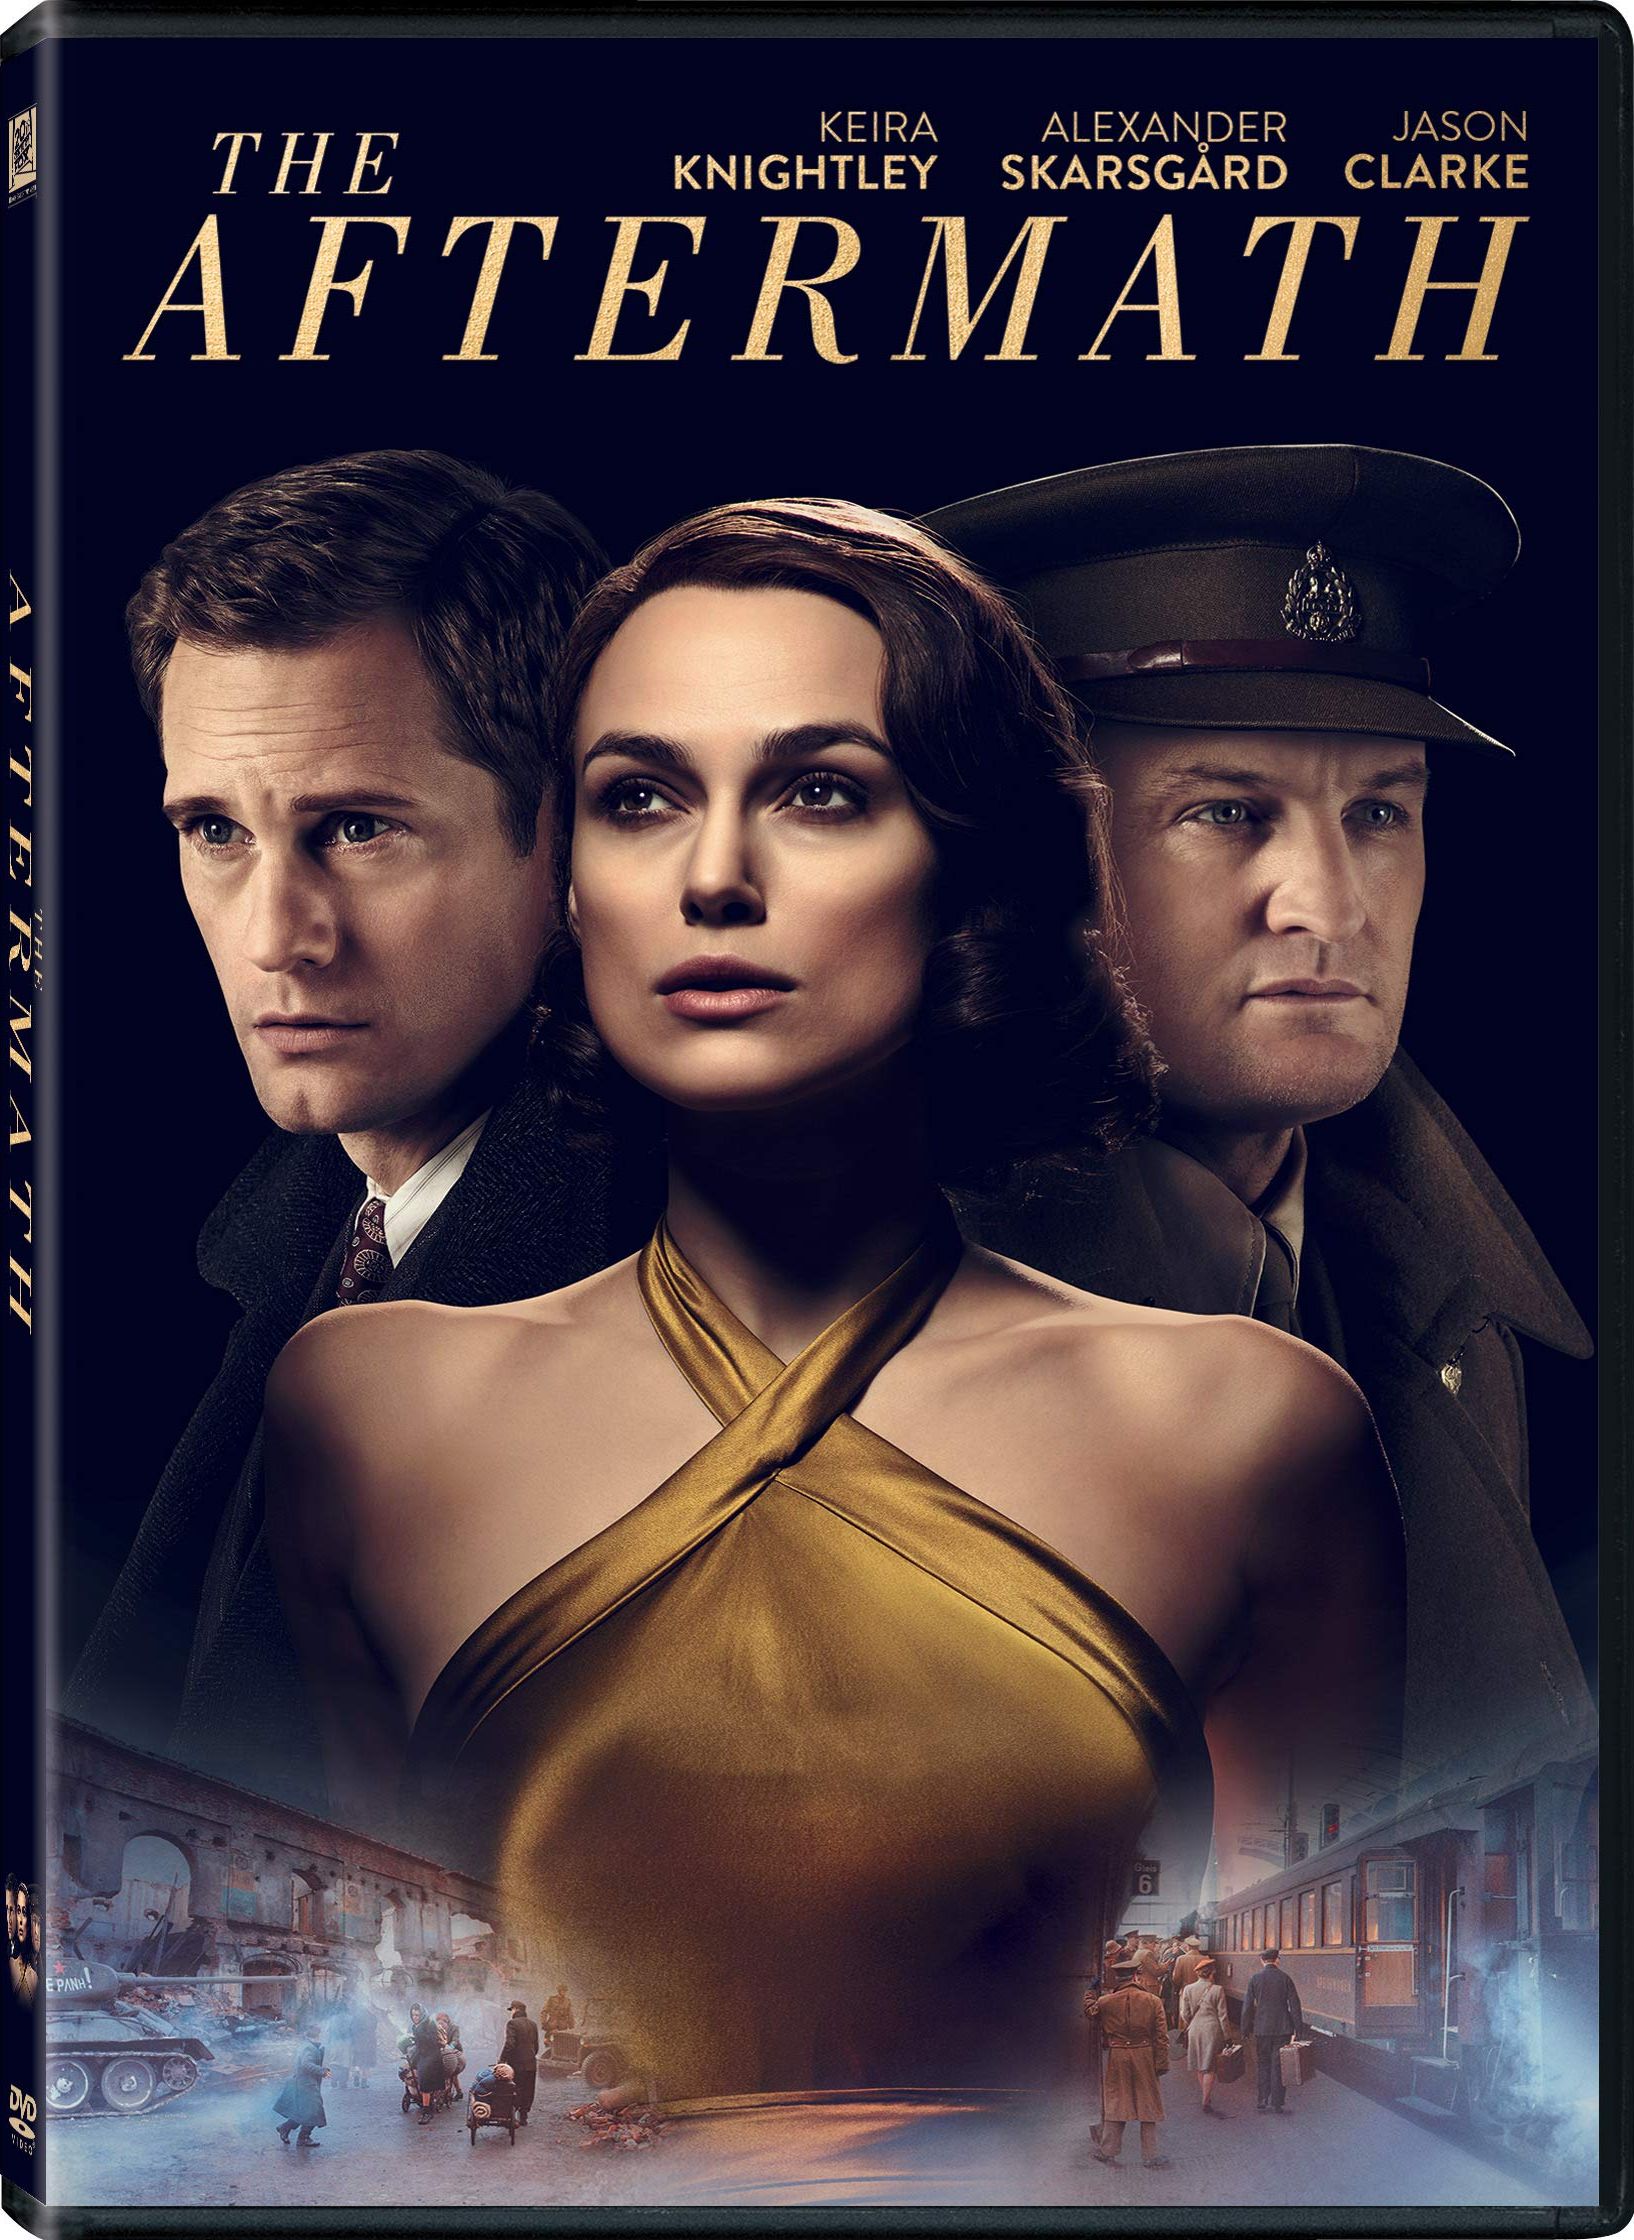 The Aftermath (2019) Hindi Dubbed ORG WEB-DL H264 AAC 1080p 720p 480p ESub